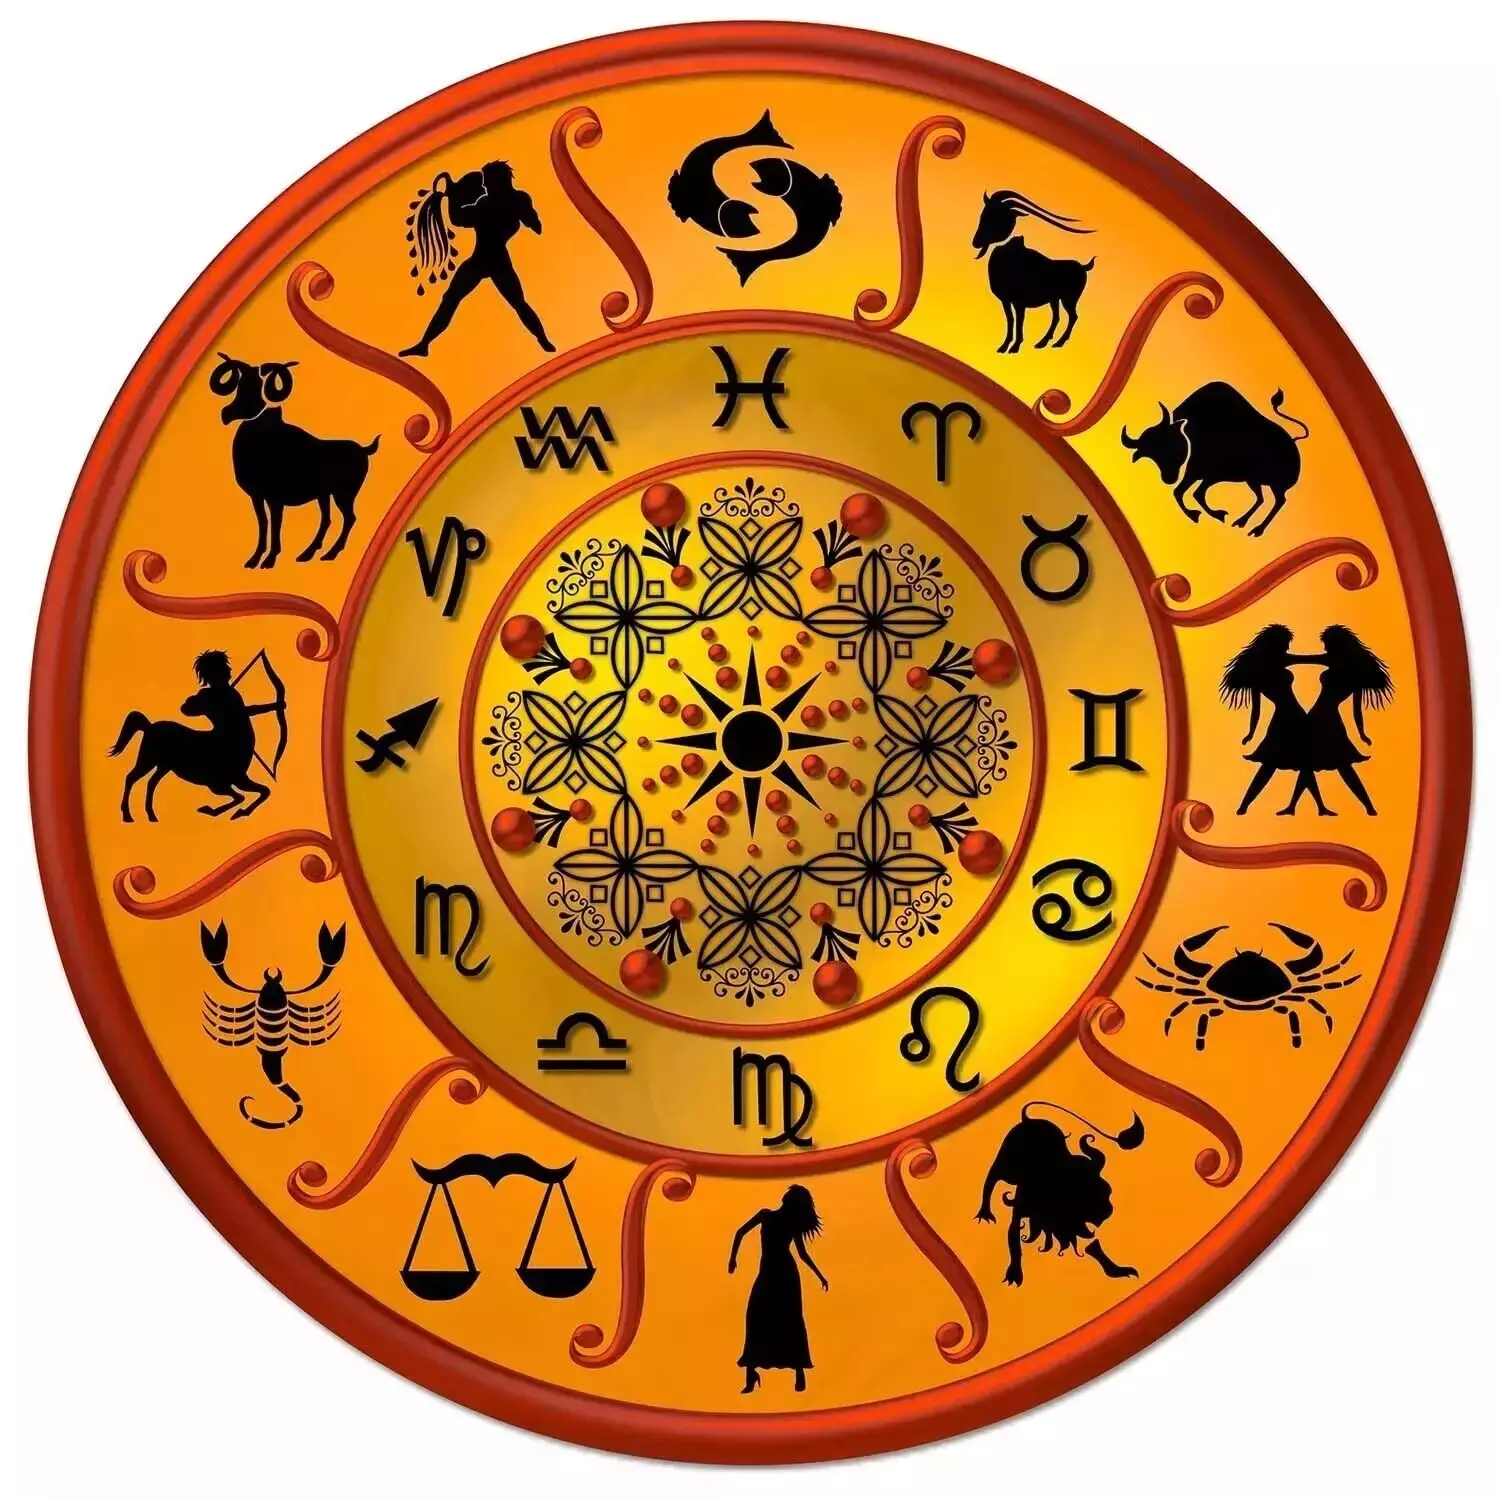 31 January – Know your todays horoscope